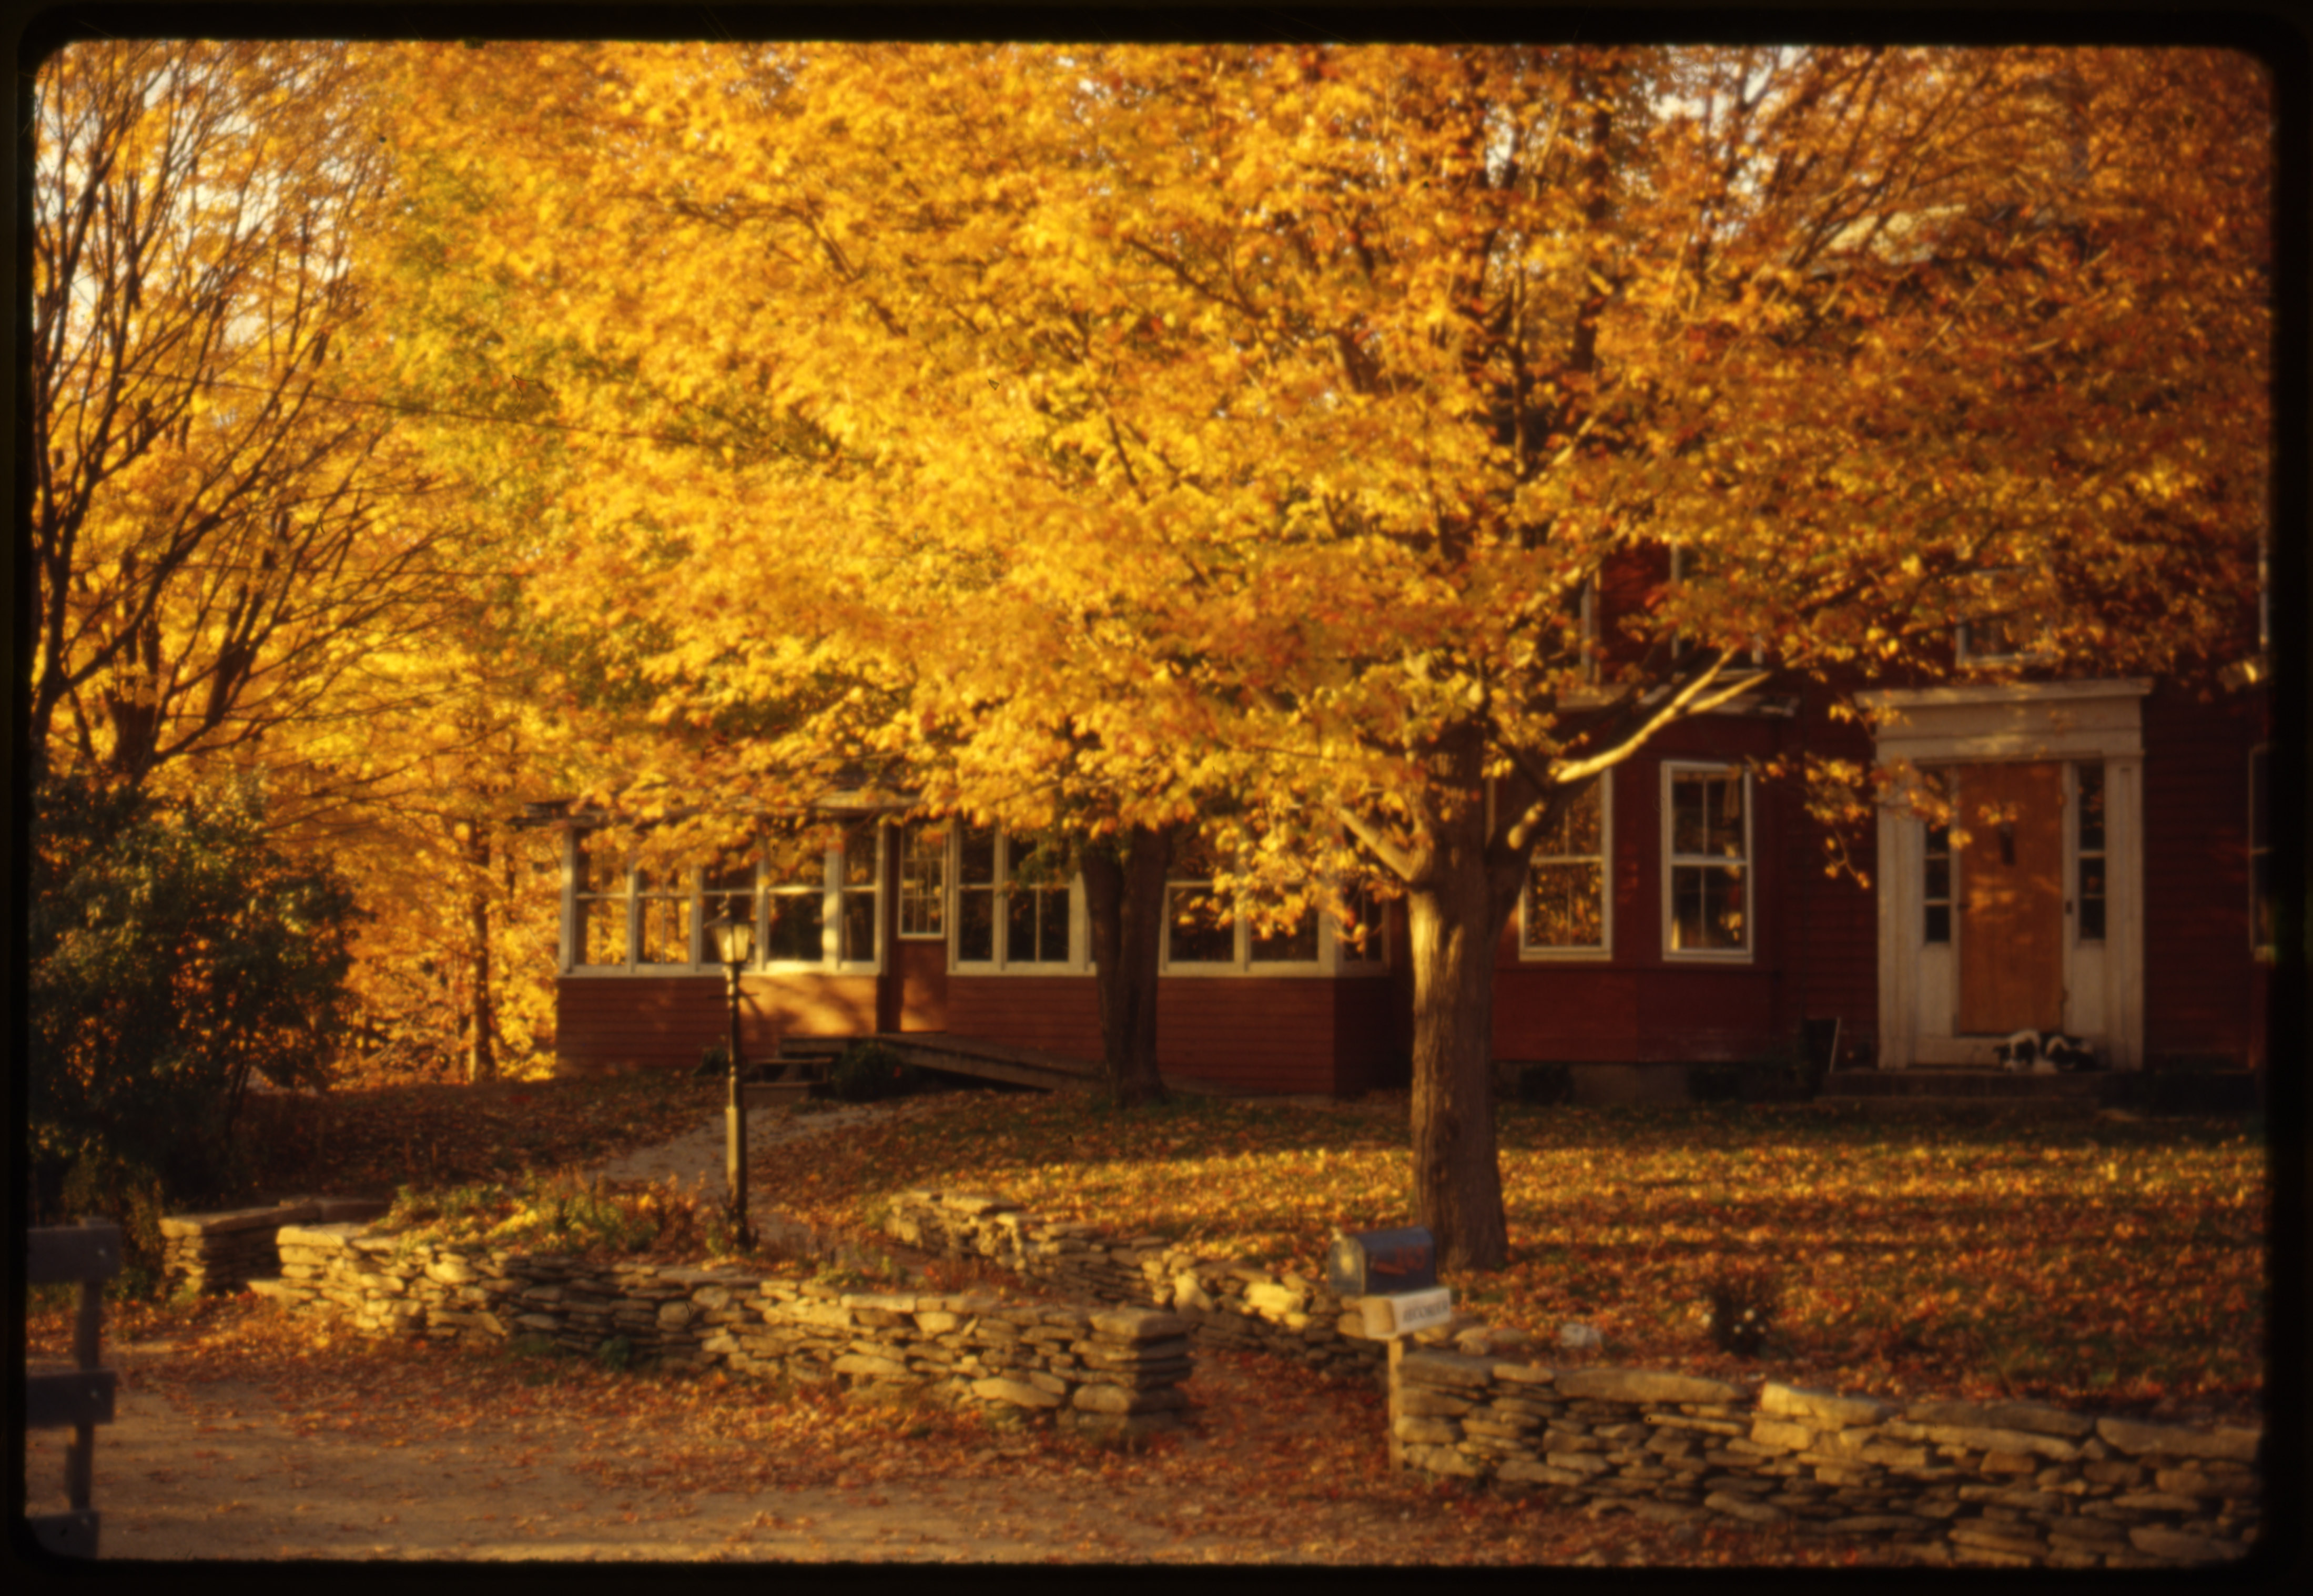 Depiction of The Farm in fall color, Oct. 1980